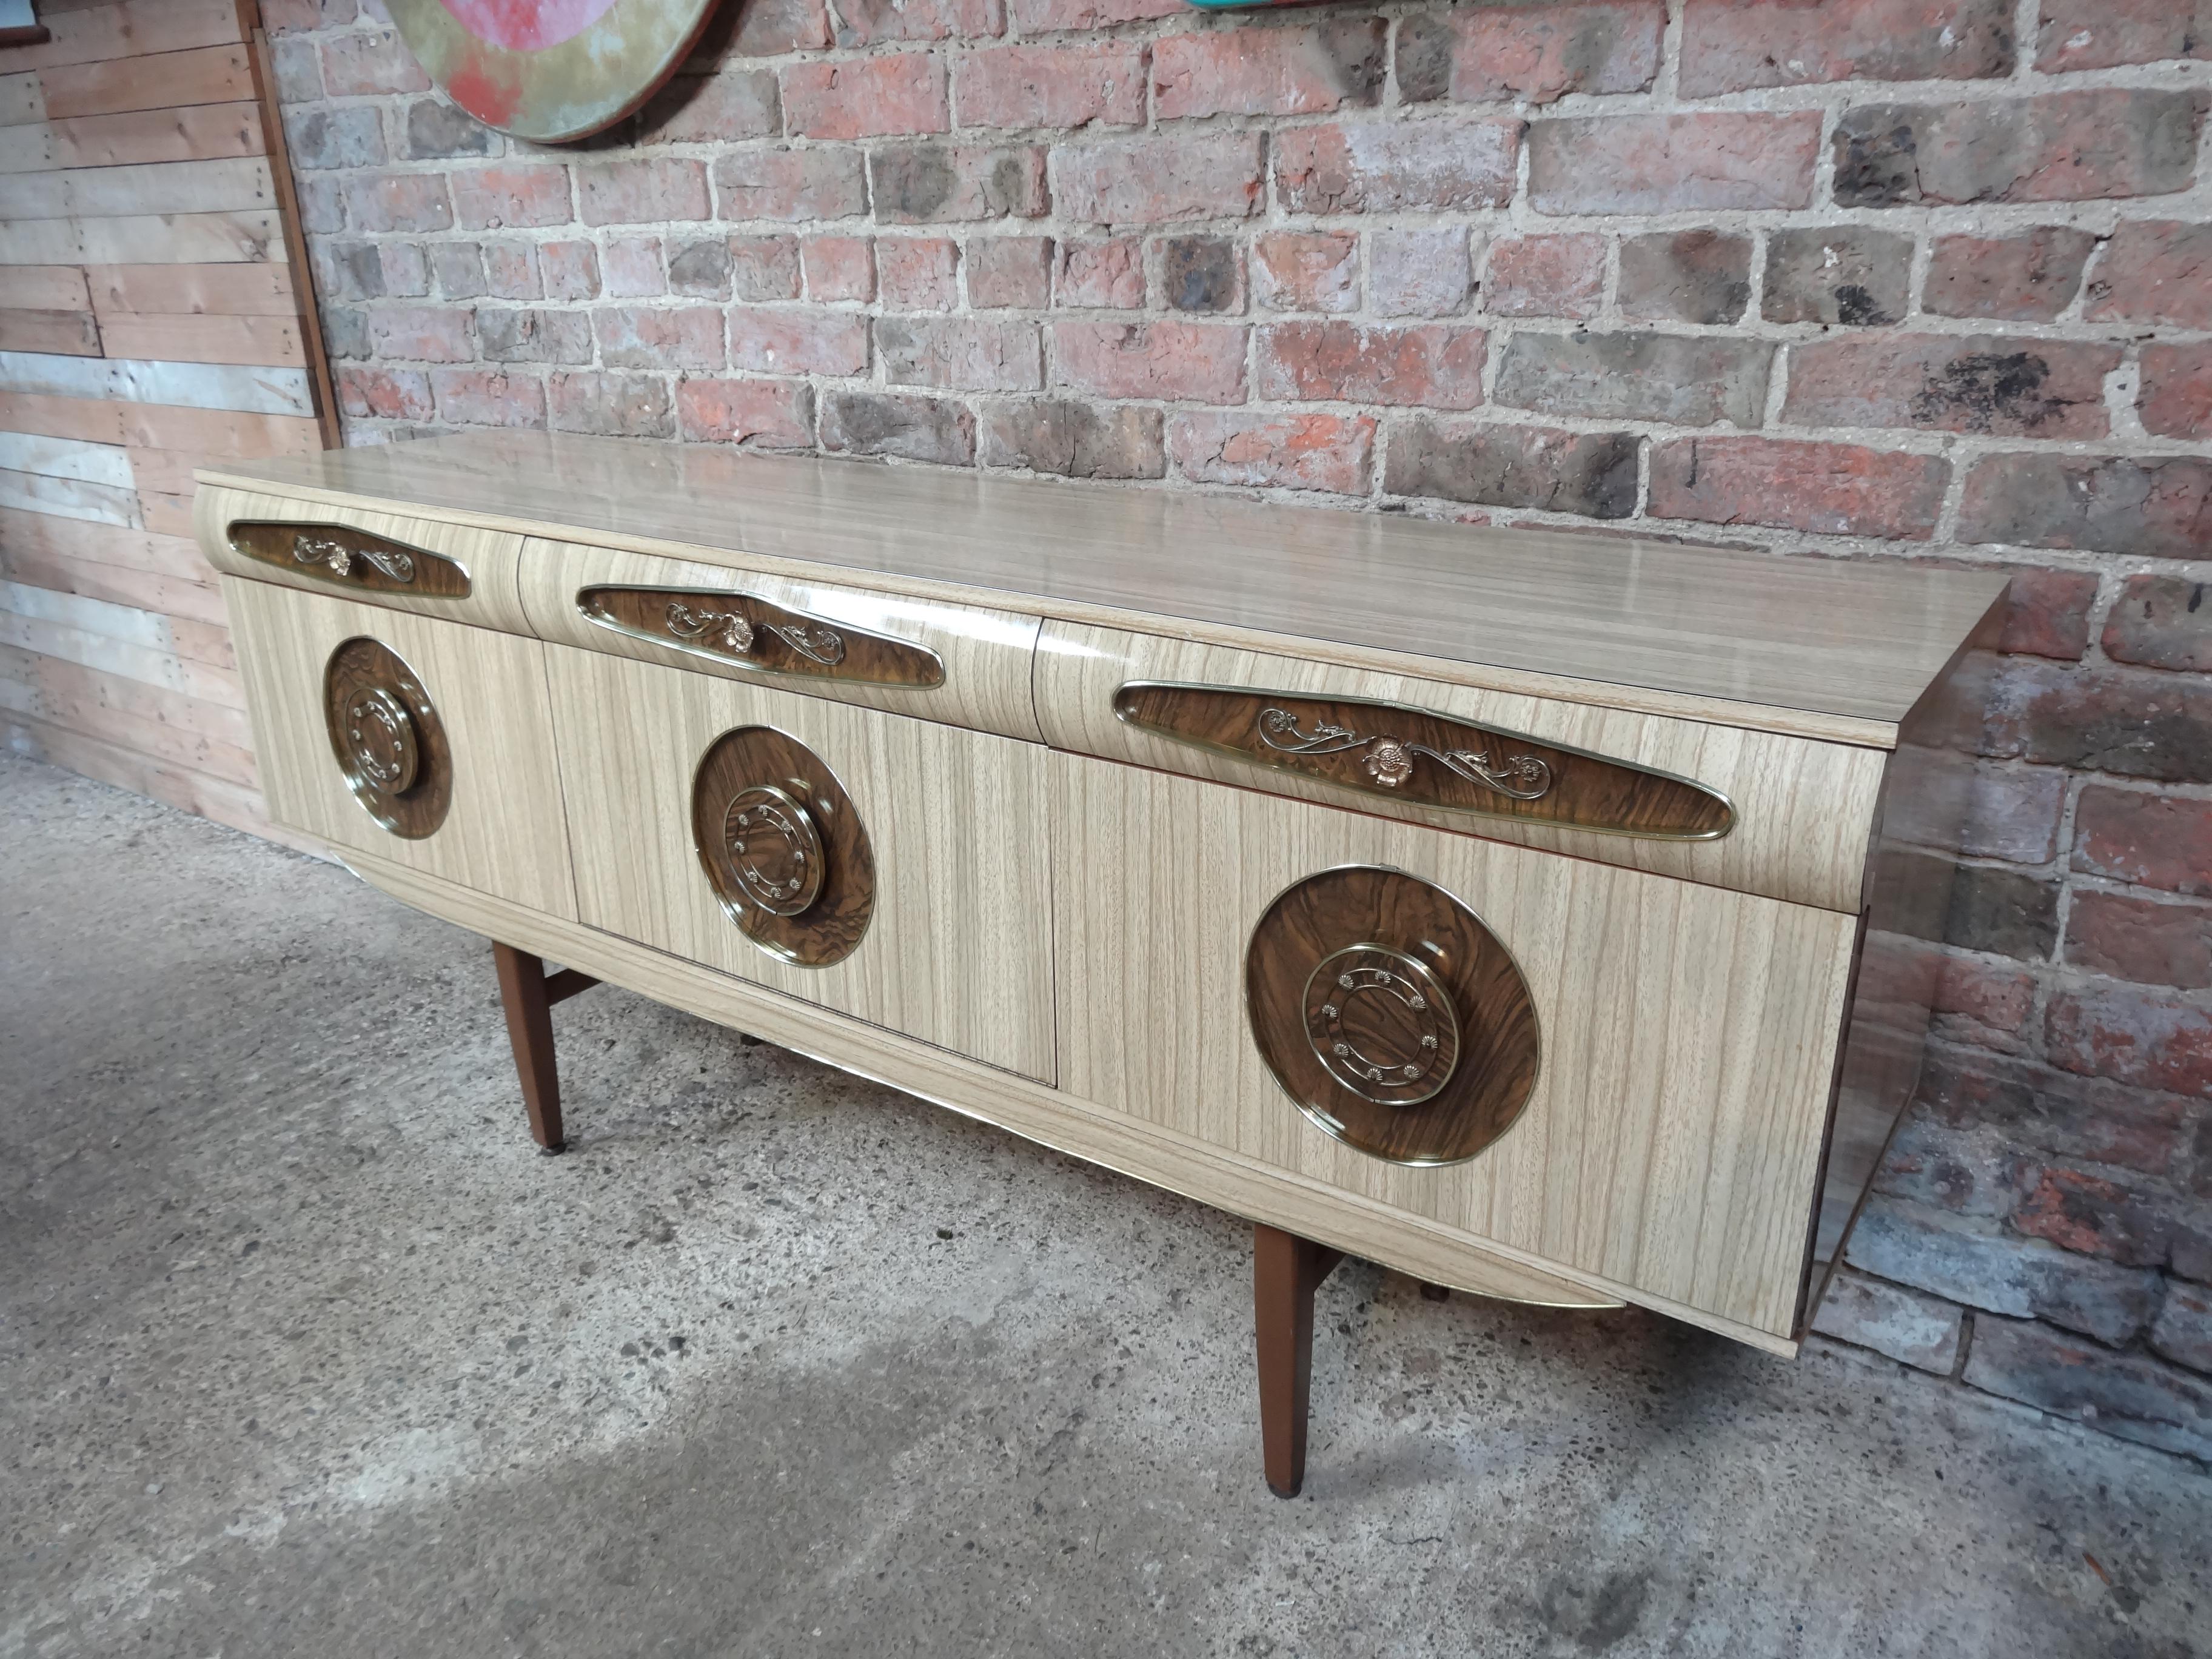 Sought after vintage retro Italian melamine sideboard with brass handles its from early 1950s. It has three drawers, cupboard space with lovely brass handles. Credenza is in very good original condition.